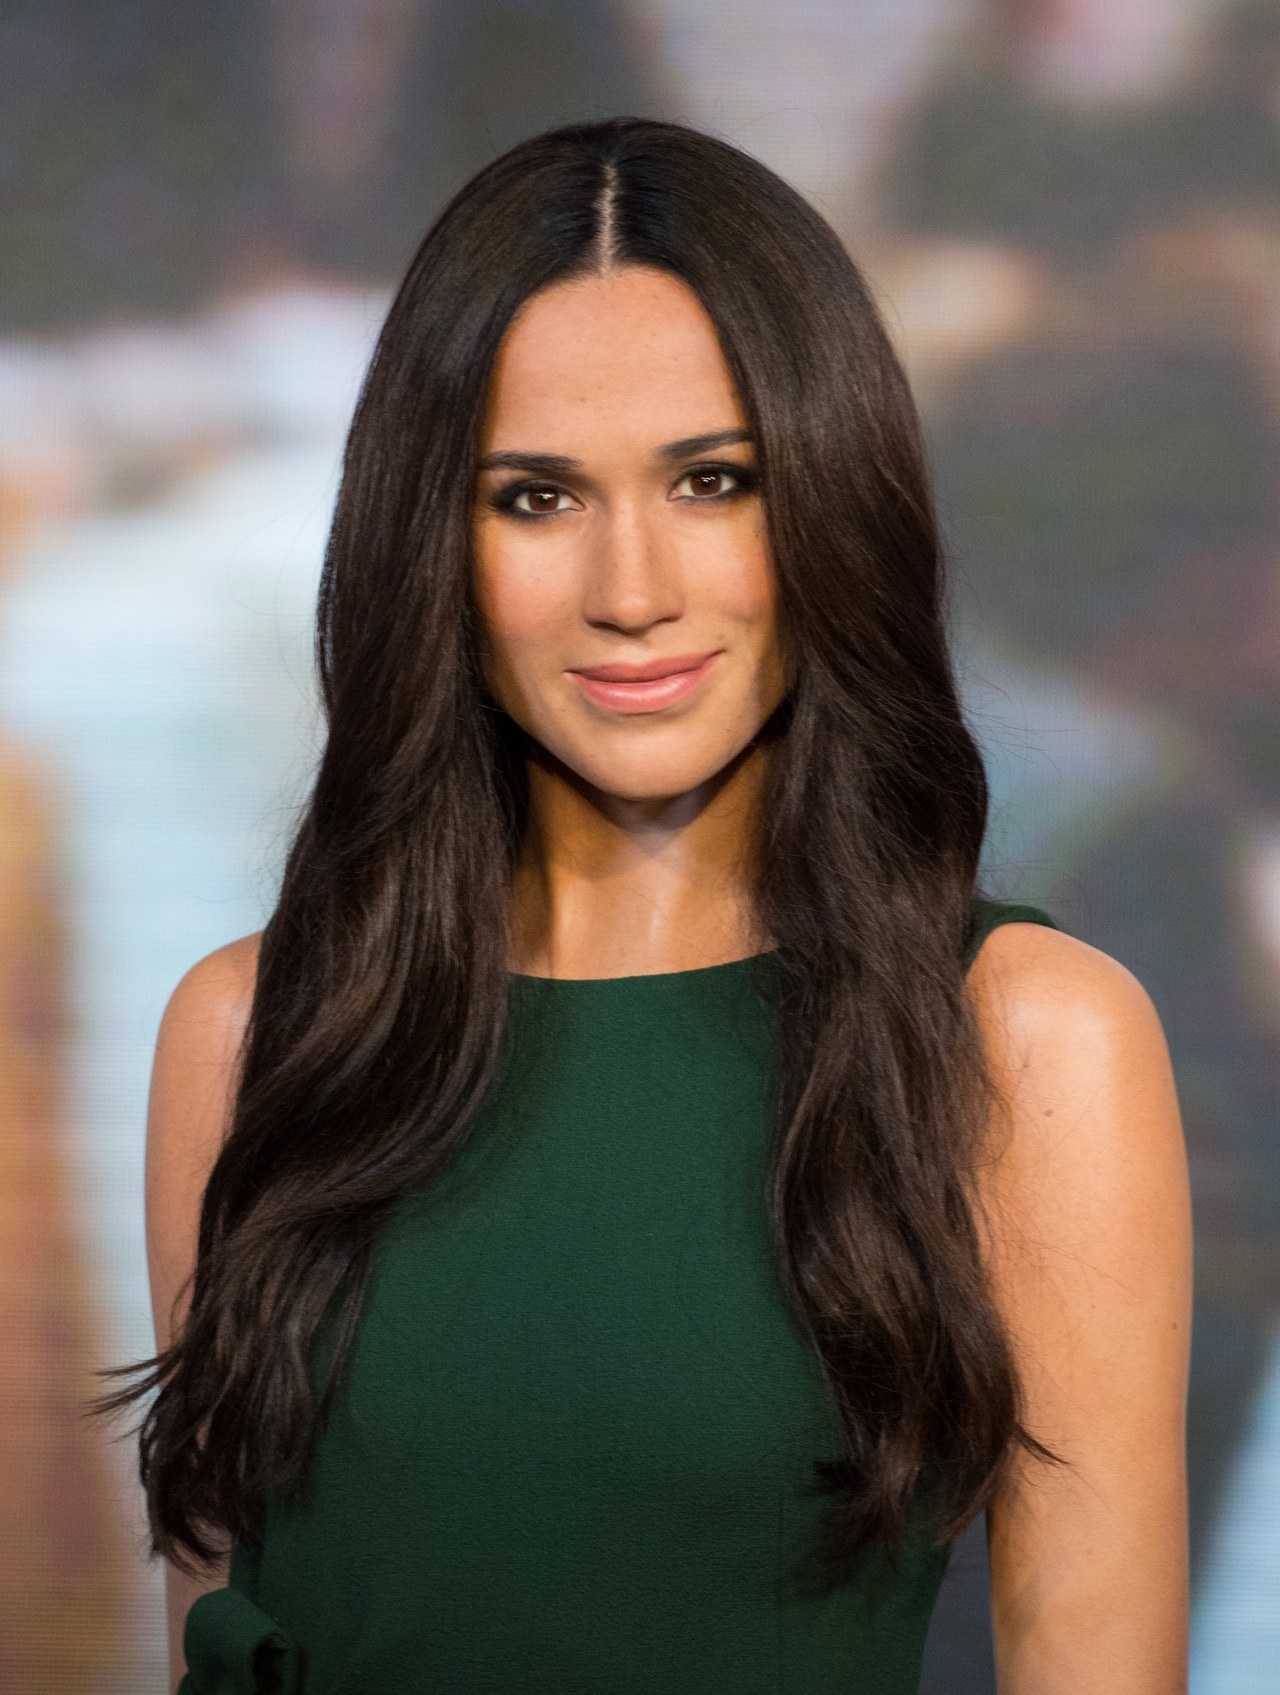 70+ Hot Pictures Of Meghan Markle Which Are Just Too Hot To Handle 234